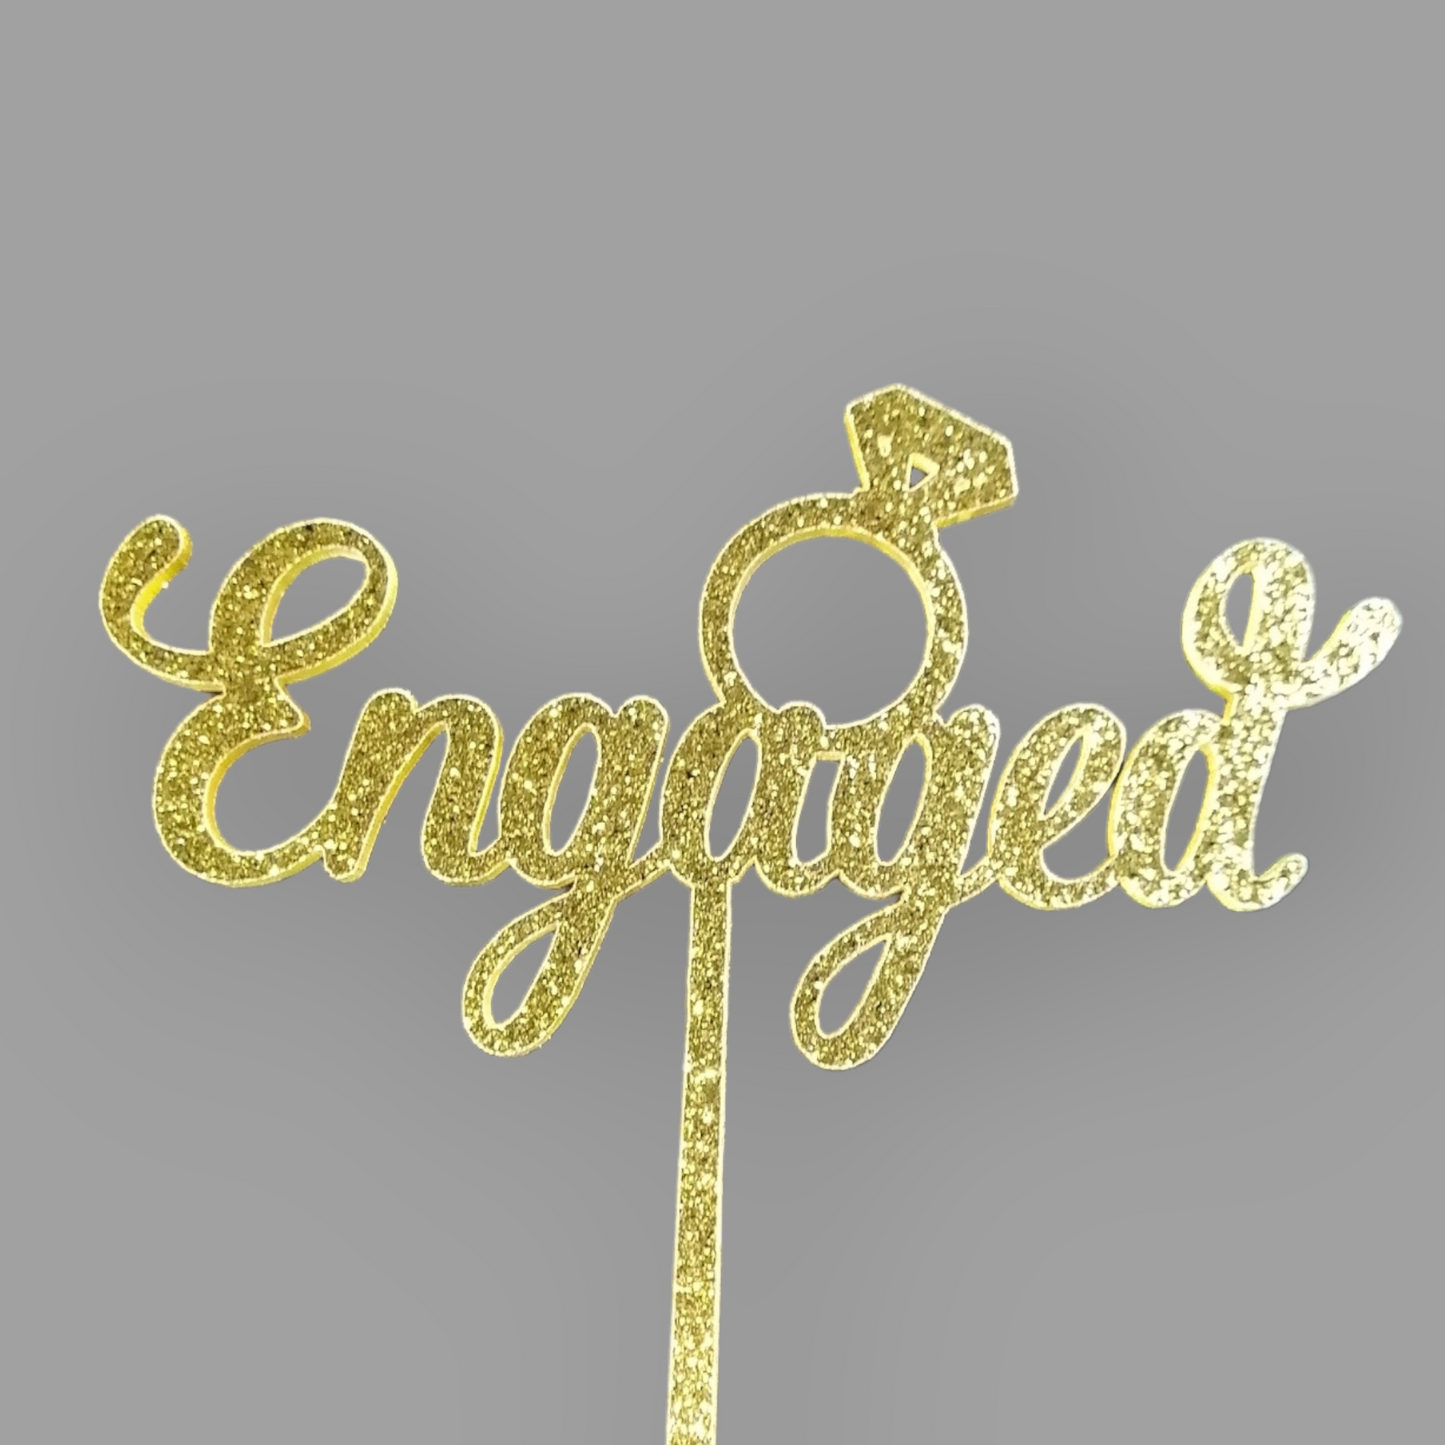 Glittery acrylic topper (gold) "Engaged"